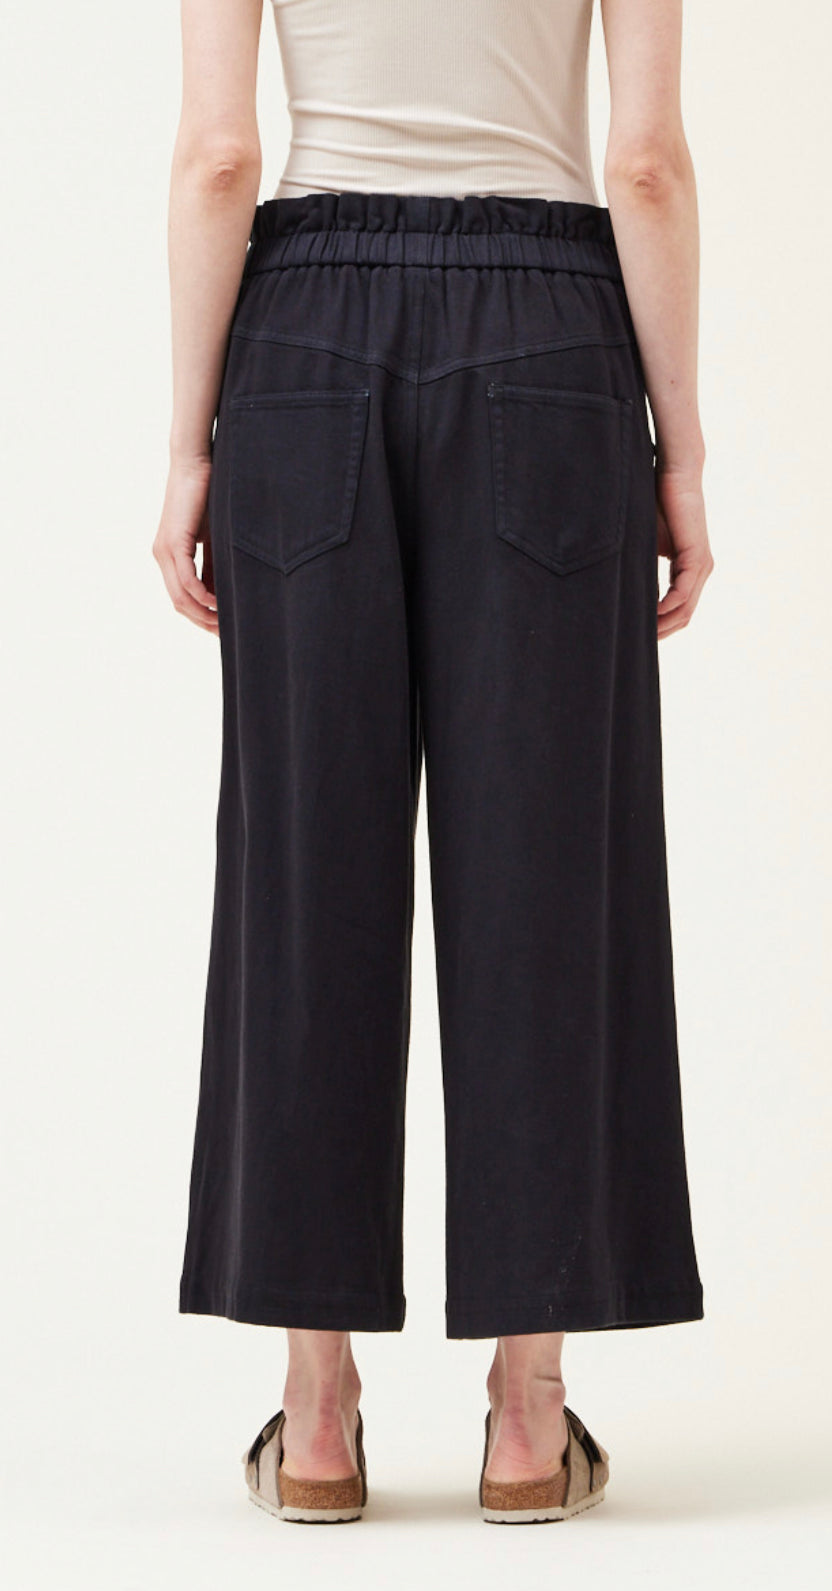 Cotton Blend Twill Pants- Faded Black